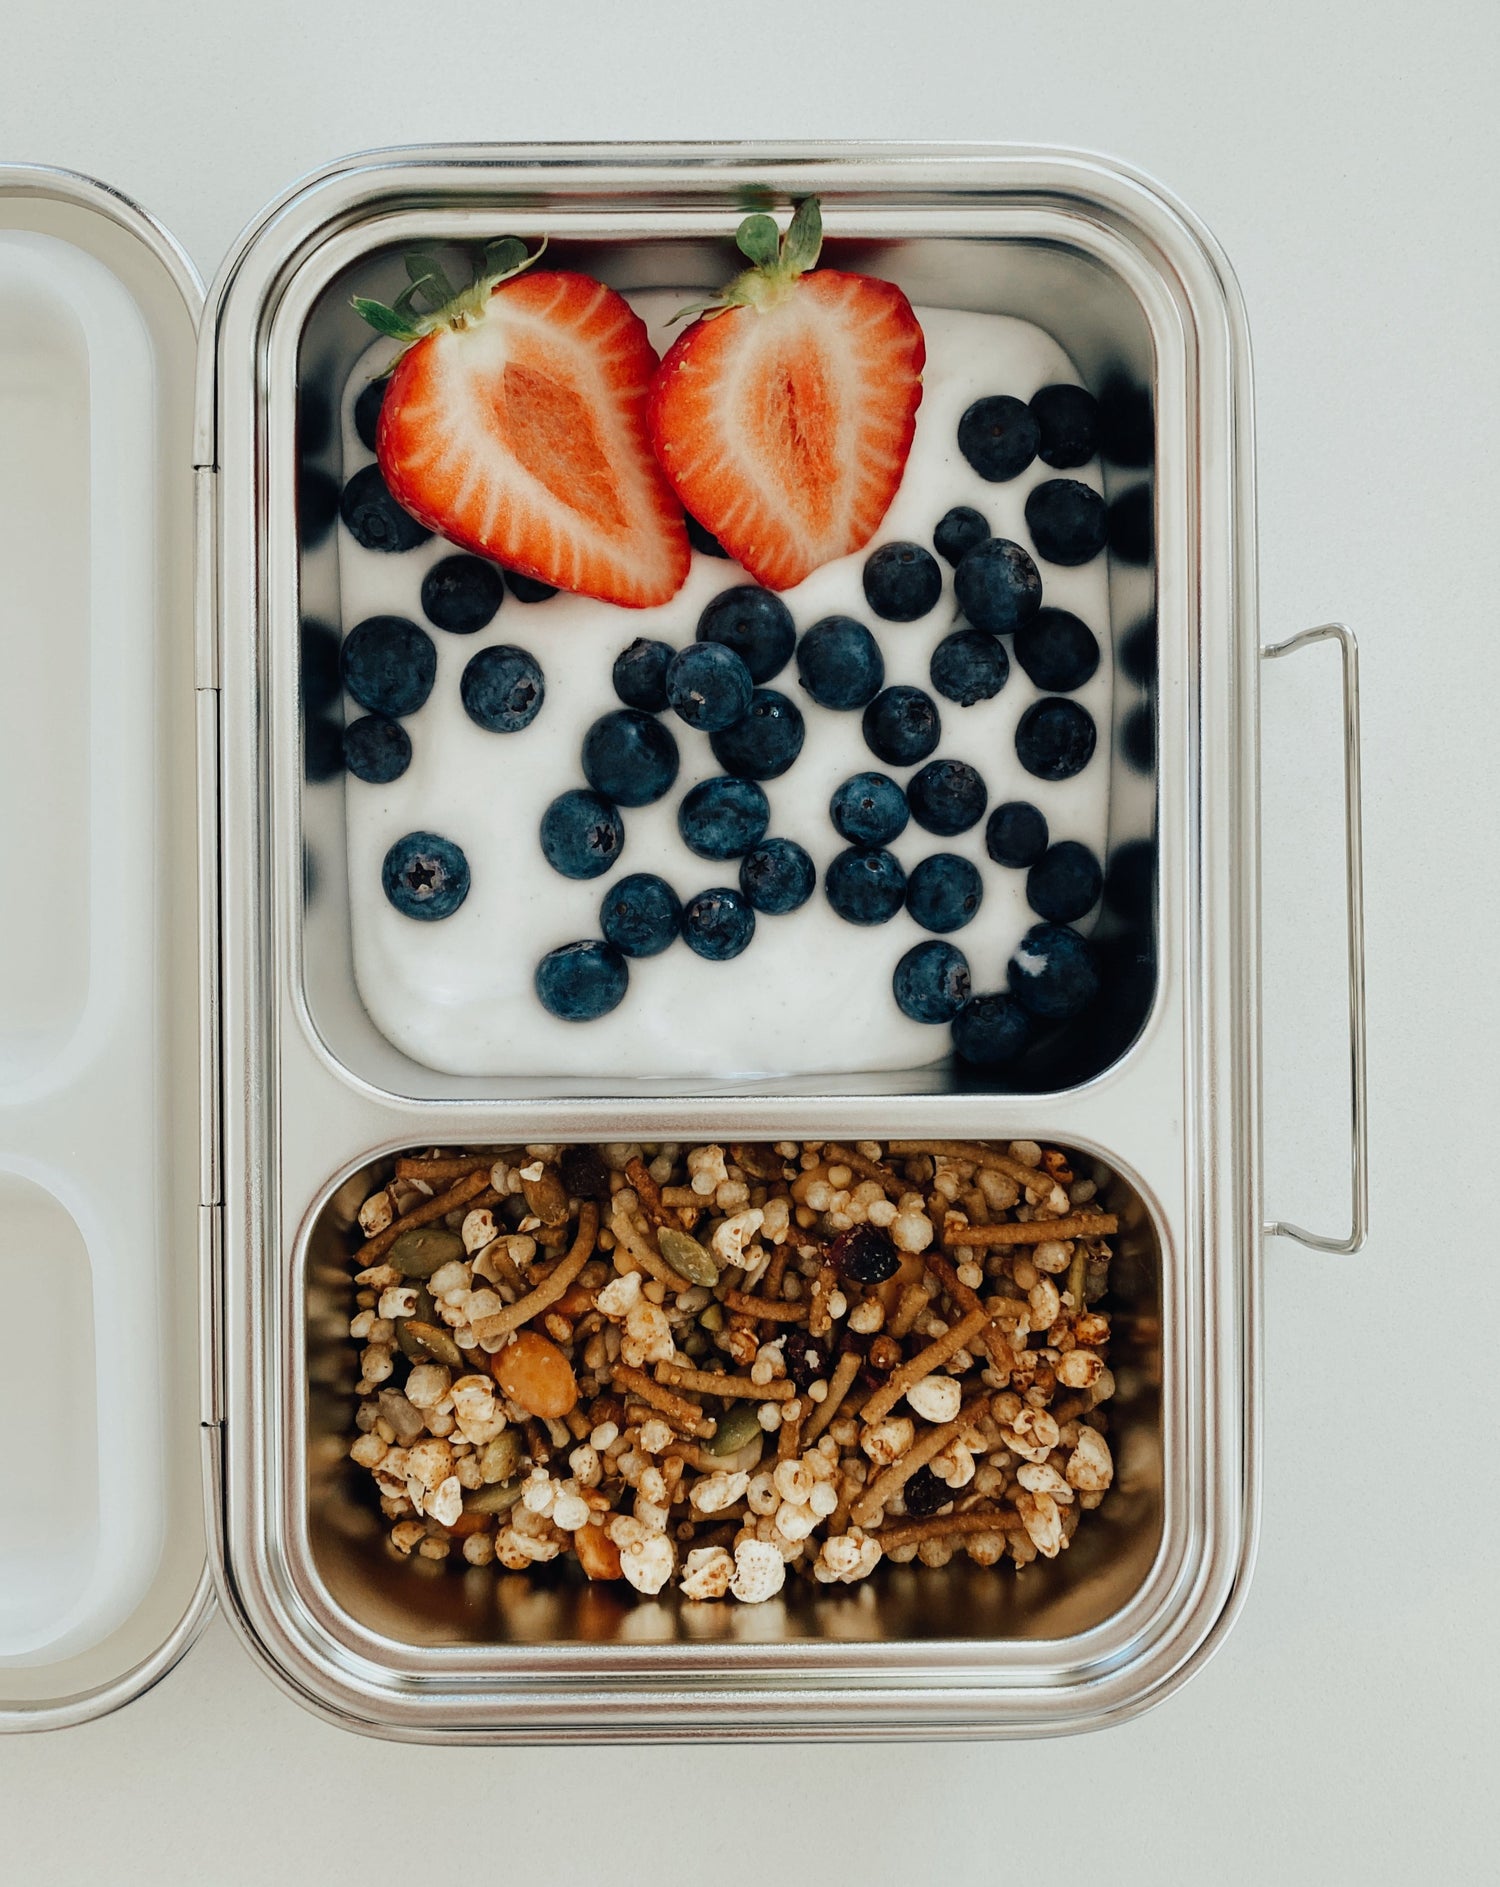 Stainless steel bento box with 2 compartments respectively. Sustainable, eco-friendly, and zero plastic lunchbox alternative. Breakfast is served with coconut yogurt, blueberries, strawberries, and gluten-free granola.